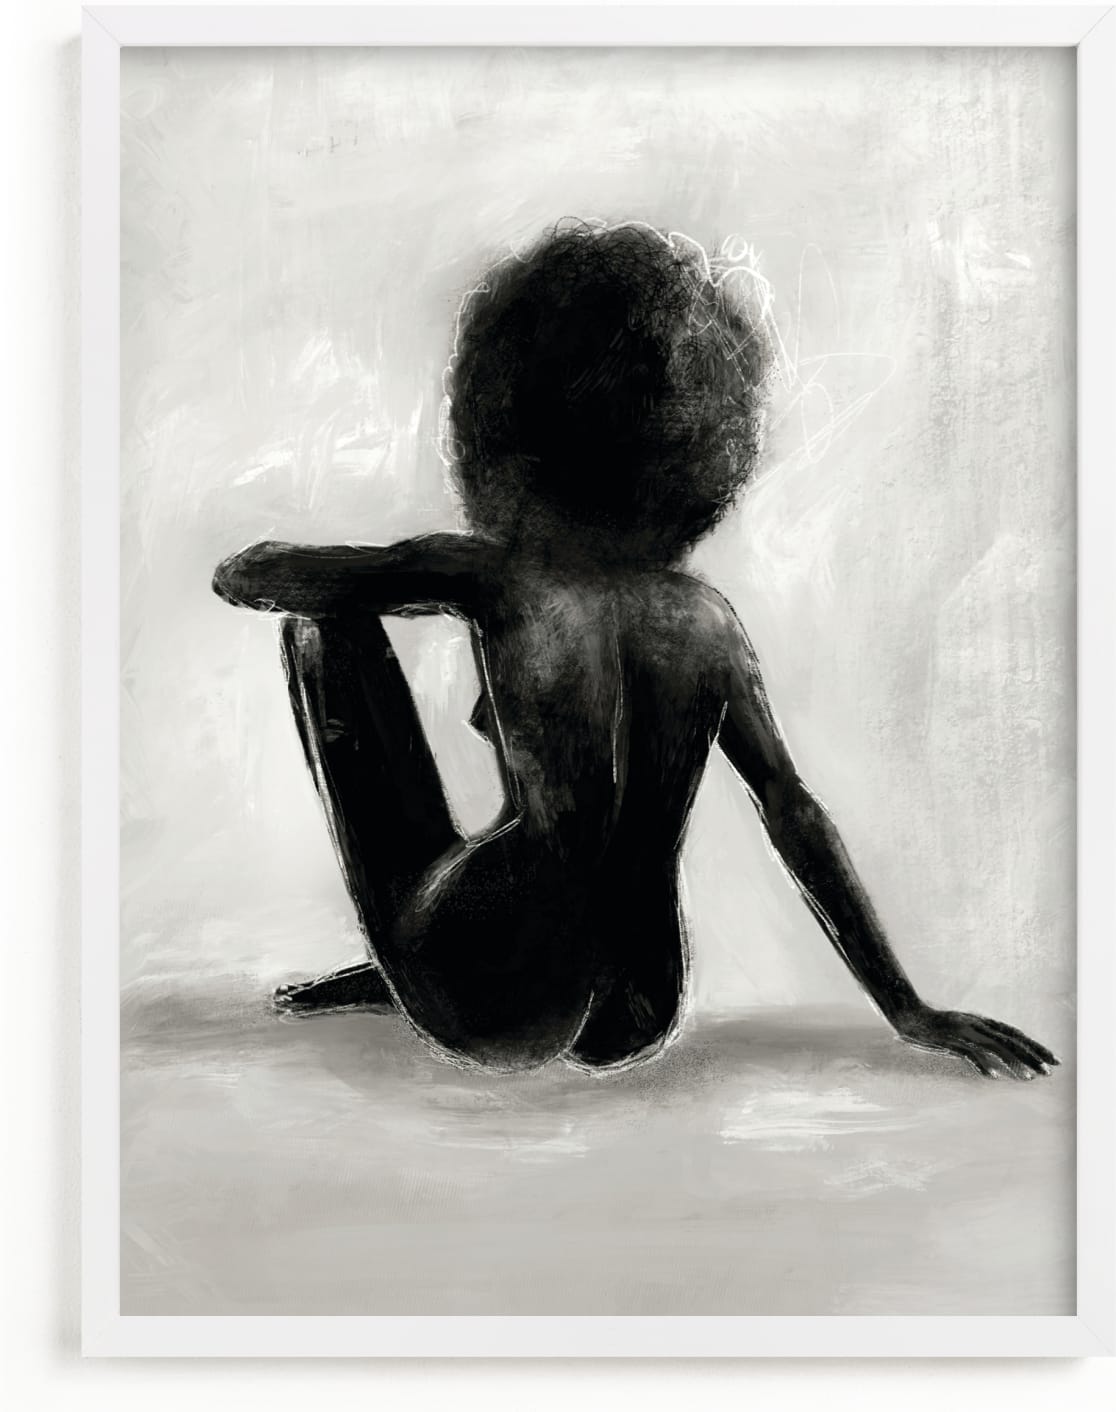 This is a black and white art by Marabou Design called noire étude.